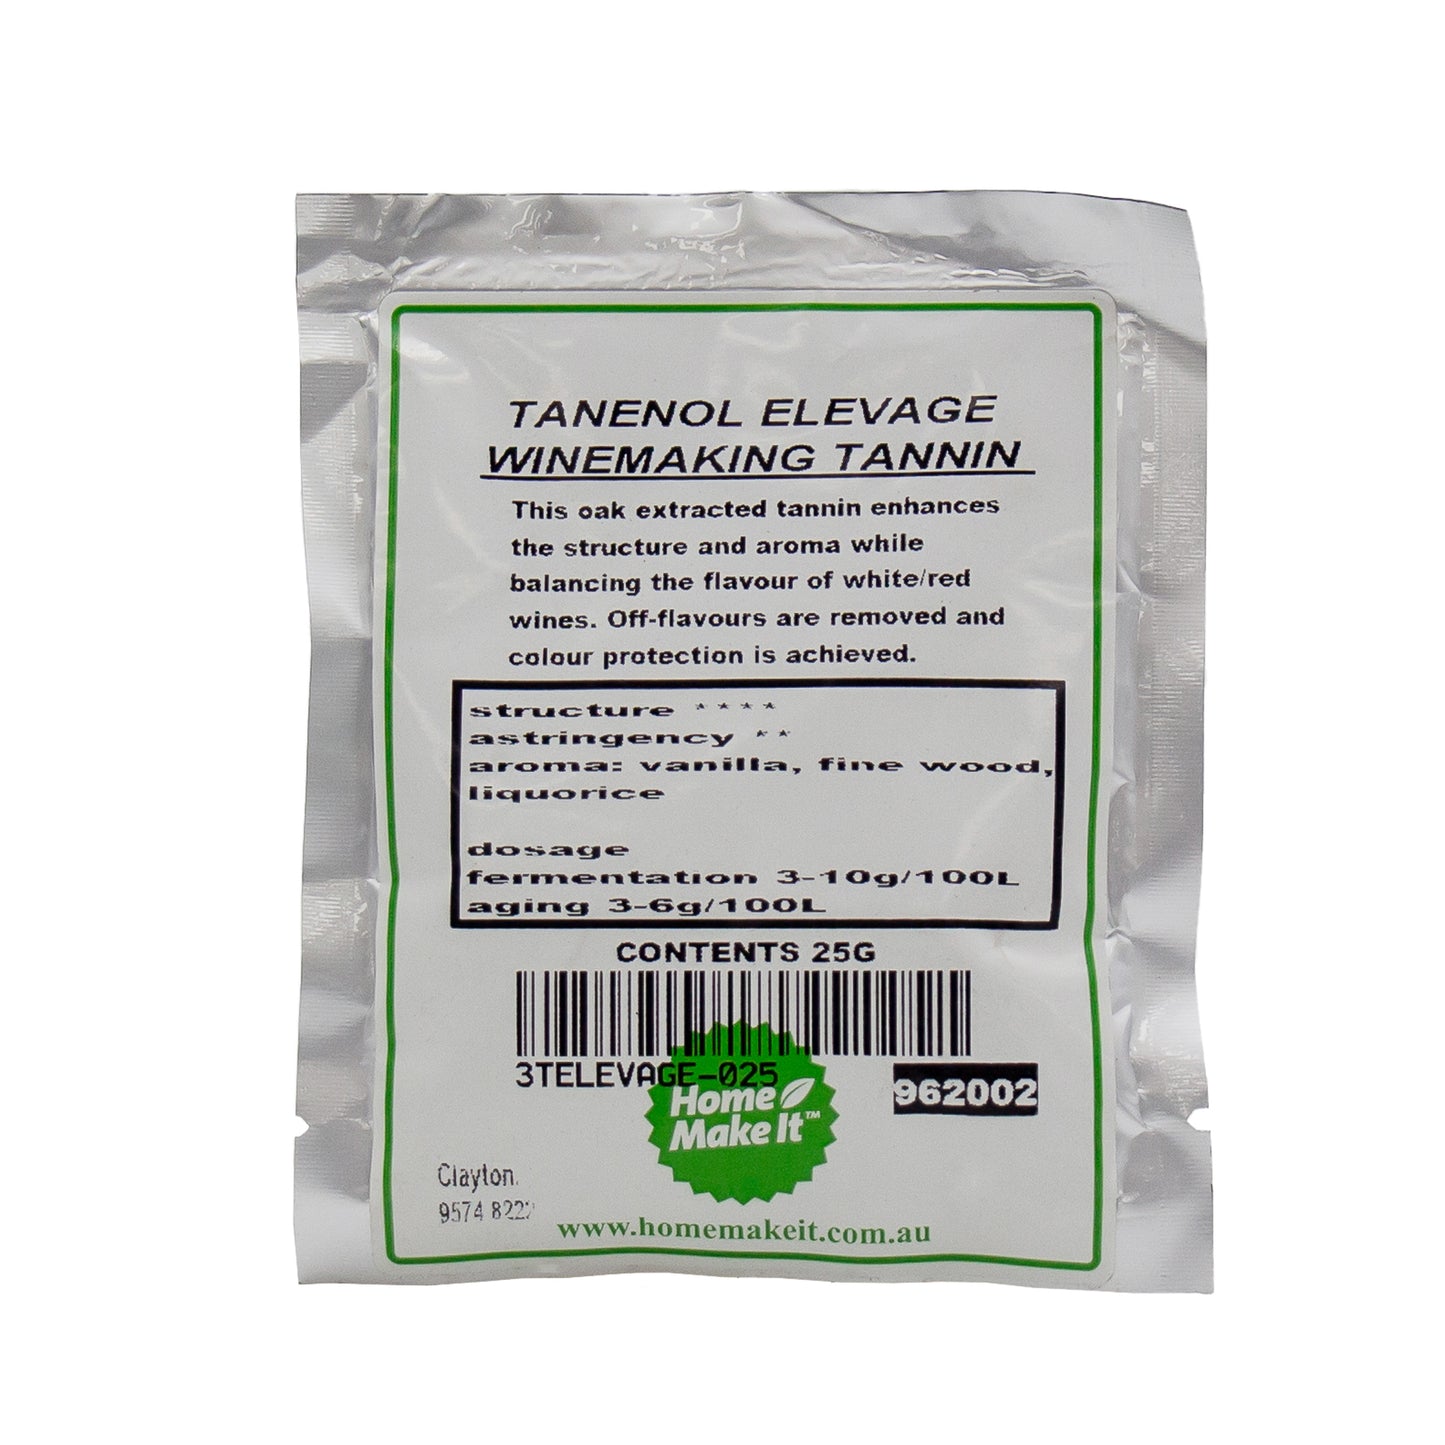 25g packet of tanenol elevage used in the wine making process. 